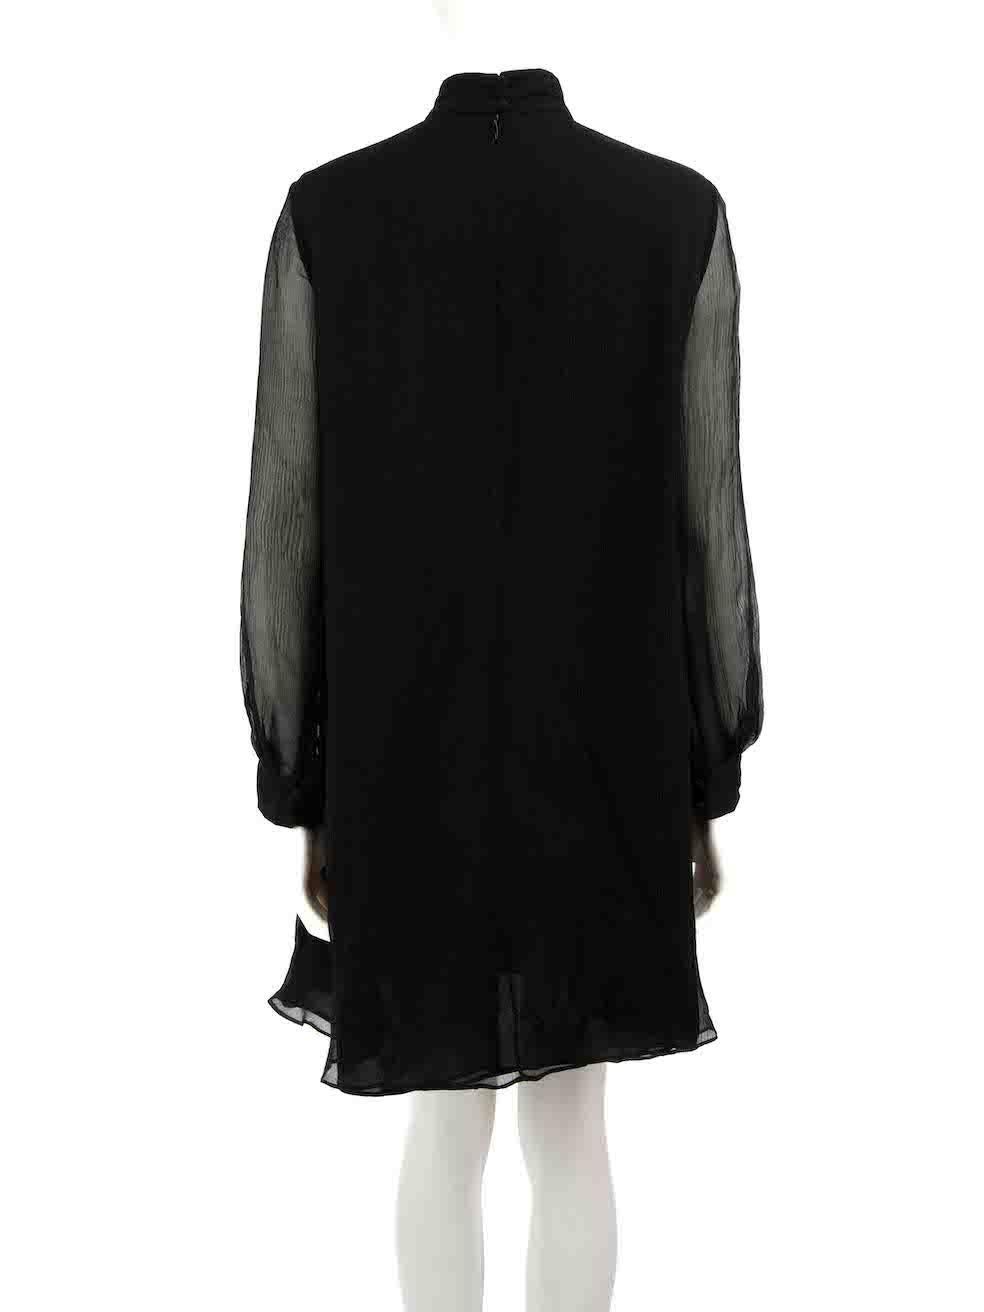 Alexander McQueen Black Silk Chiffon Dress Size M In Excellent Condition For Sale In London, GB